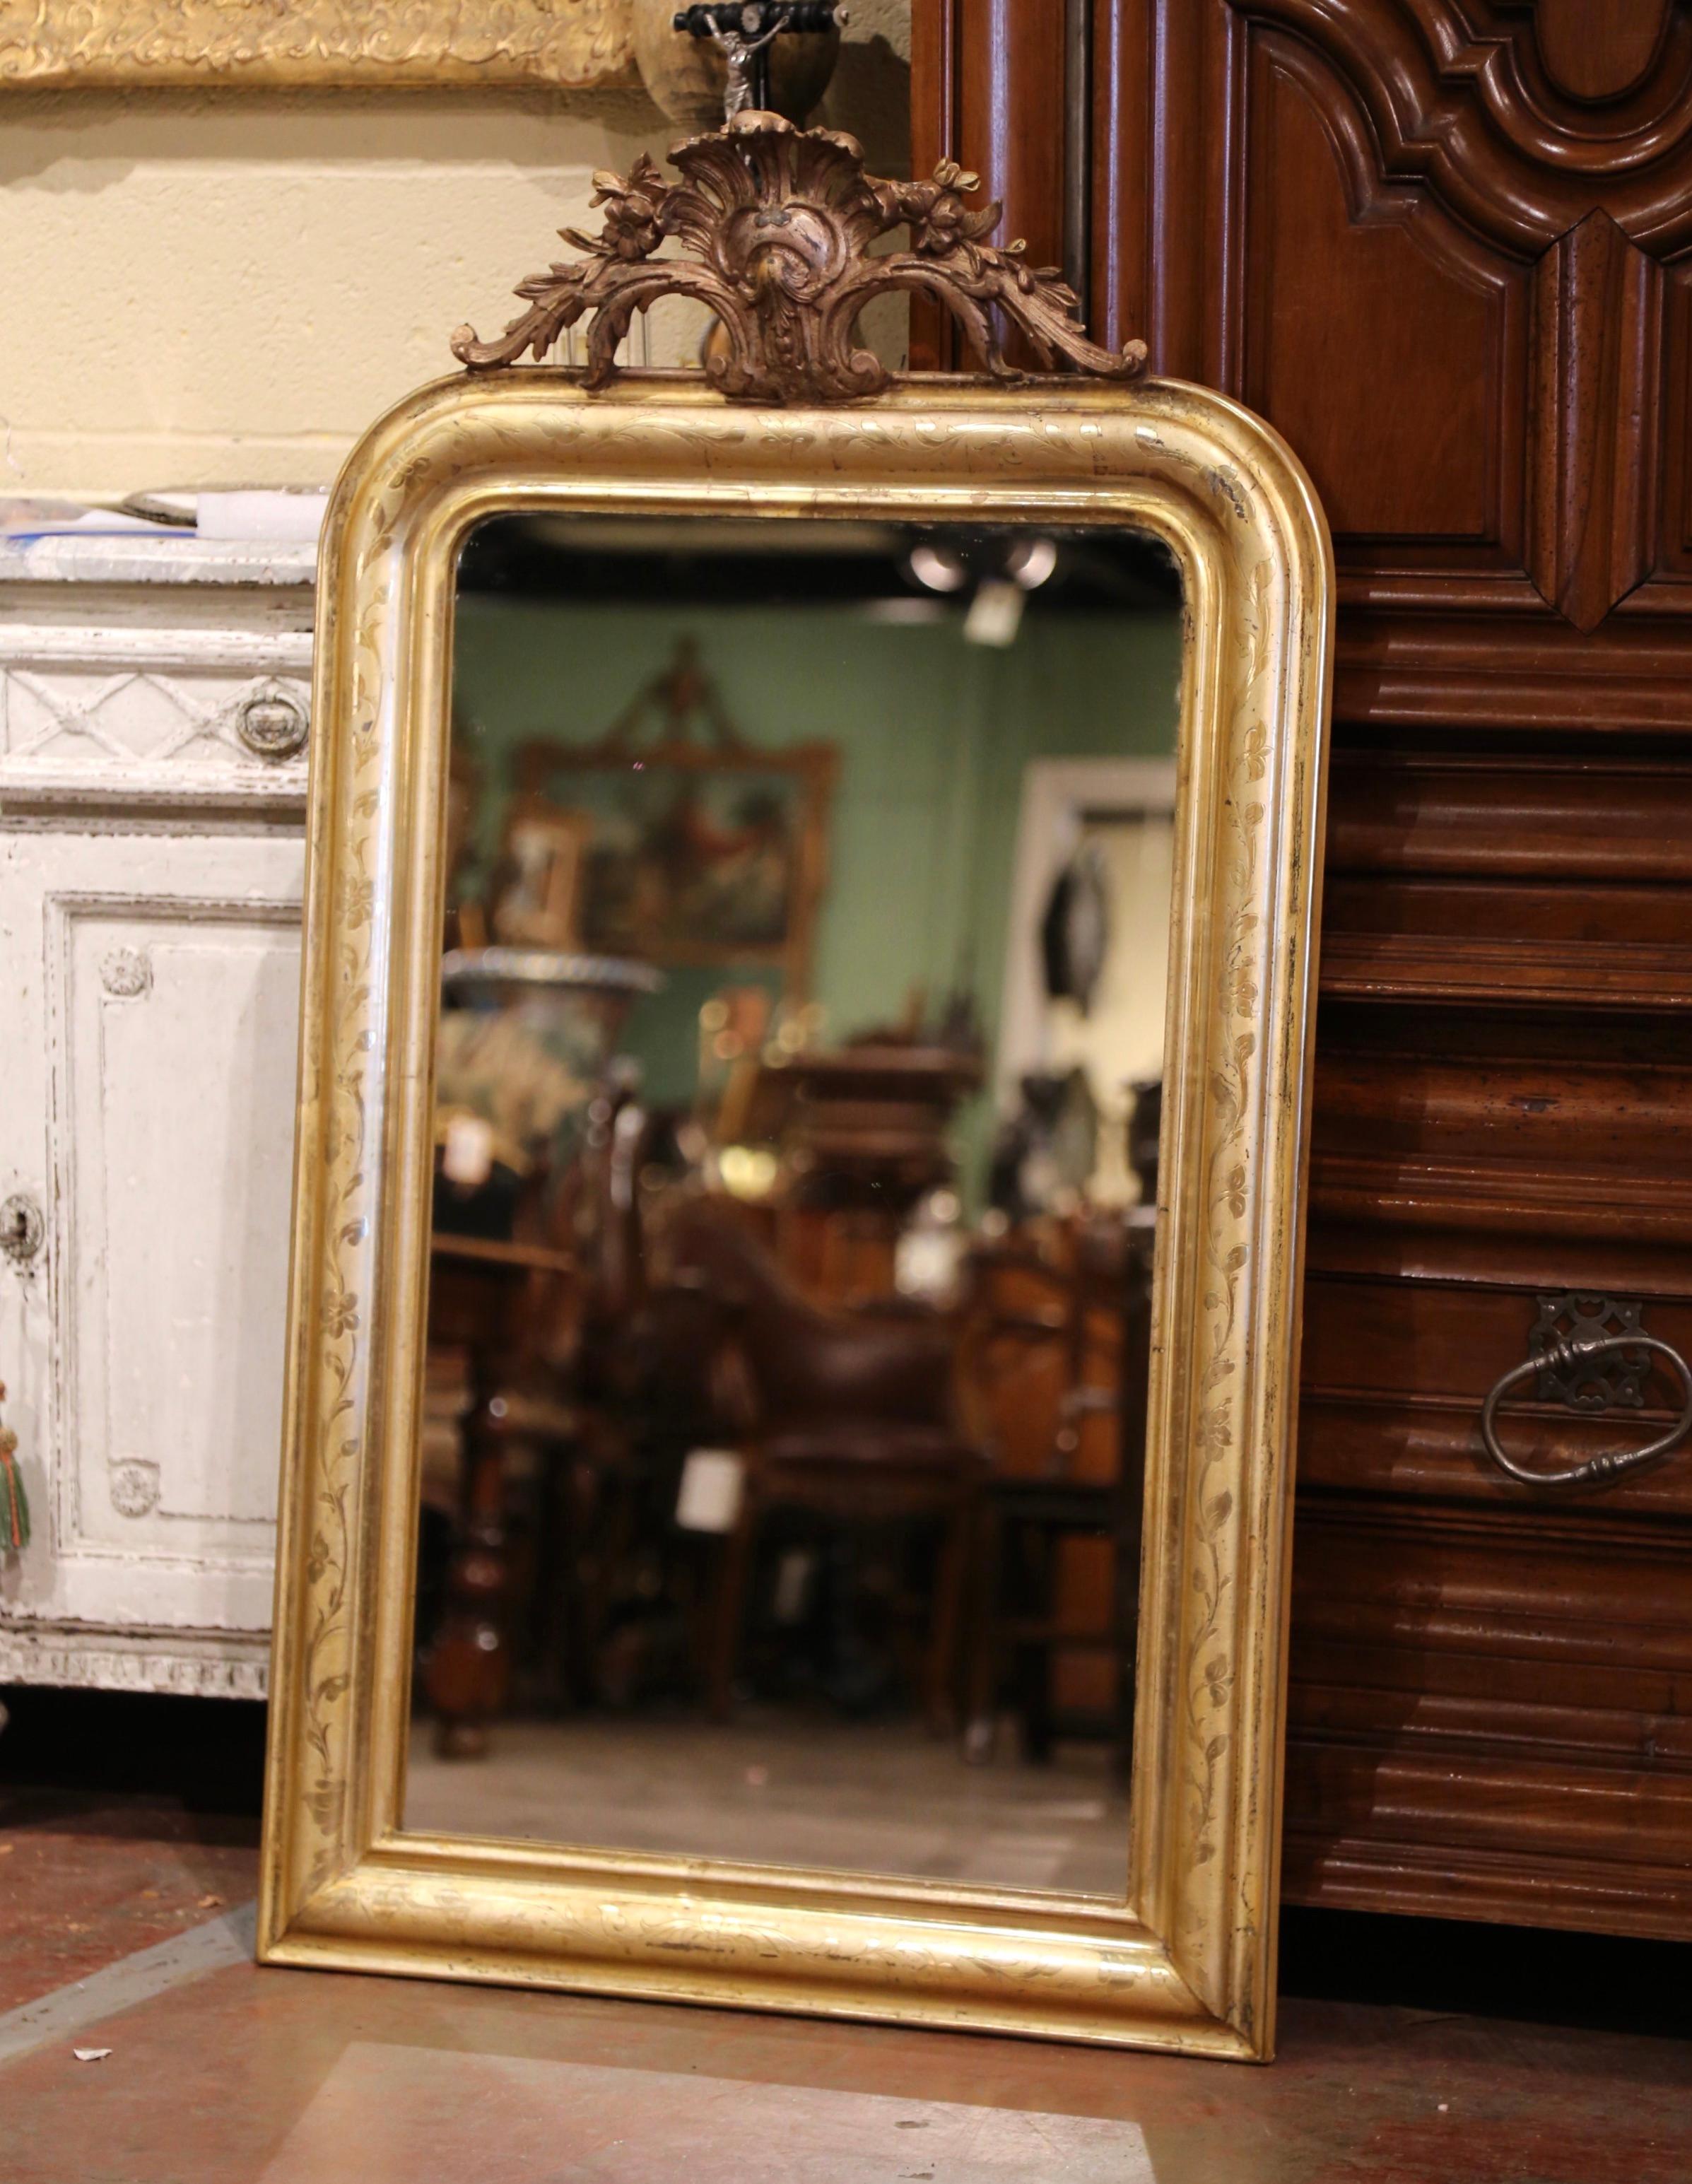 This elegant, antique wall mirror was crafted in France, circa 1870. The wall decor features a large shell cartouche at the pediment flanked with carved foliate motifs on the sides. The gilt frame, dressed with the original inside mercury glass, is